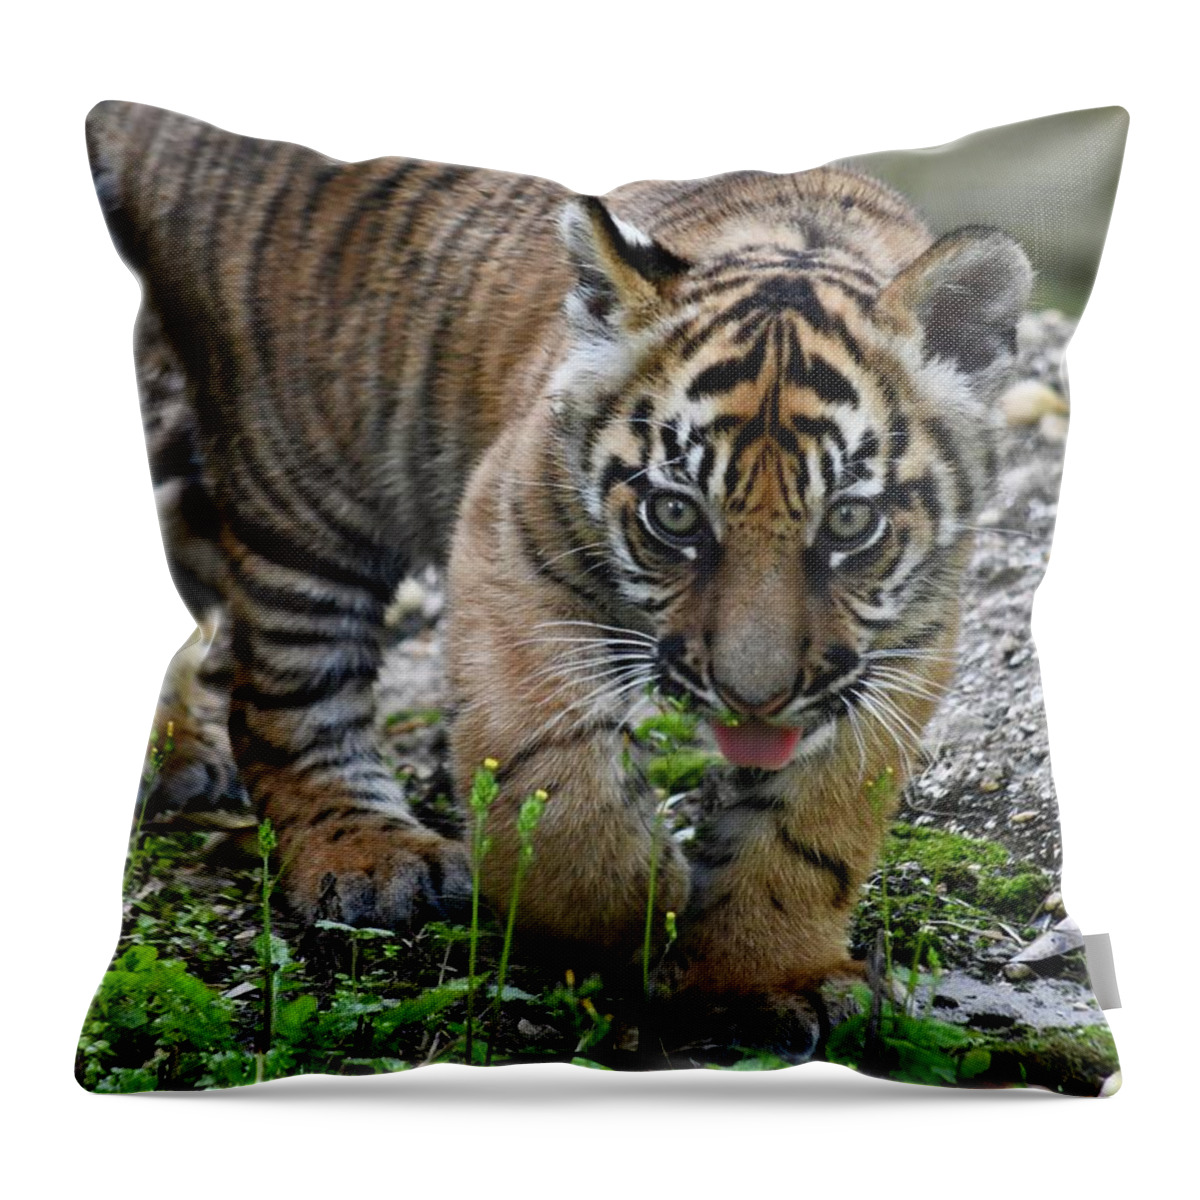 Tiger Throw Pillow featuring the photograph Tongue Out Tiger Cub by Richard Bryce and Family